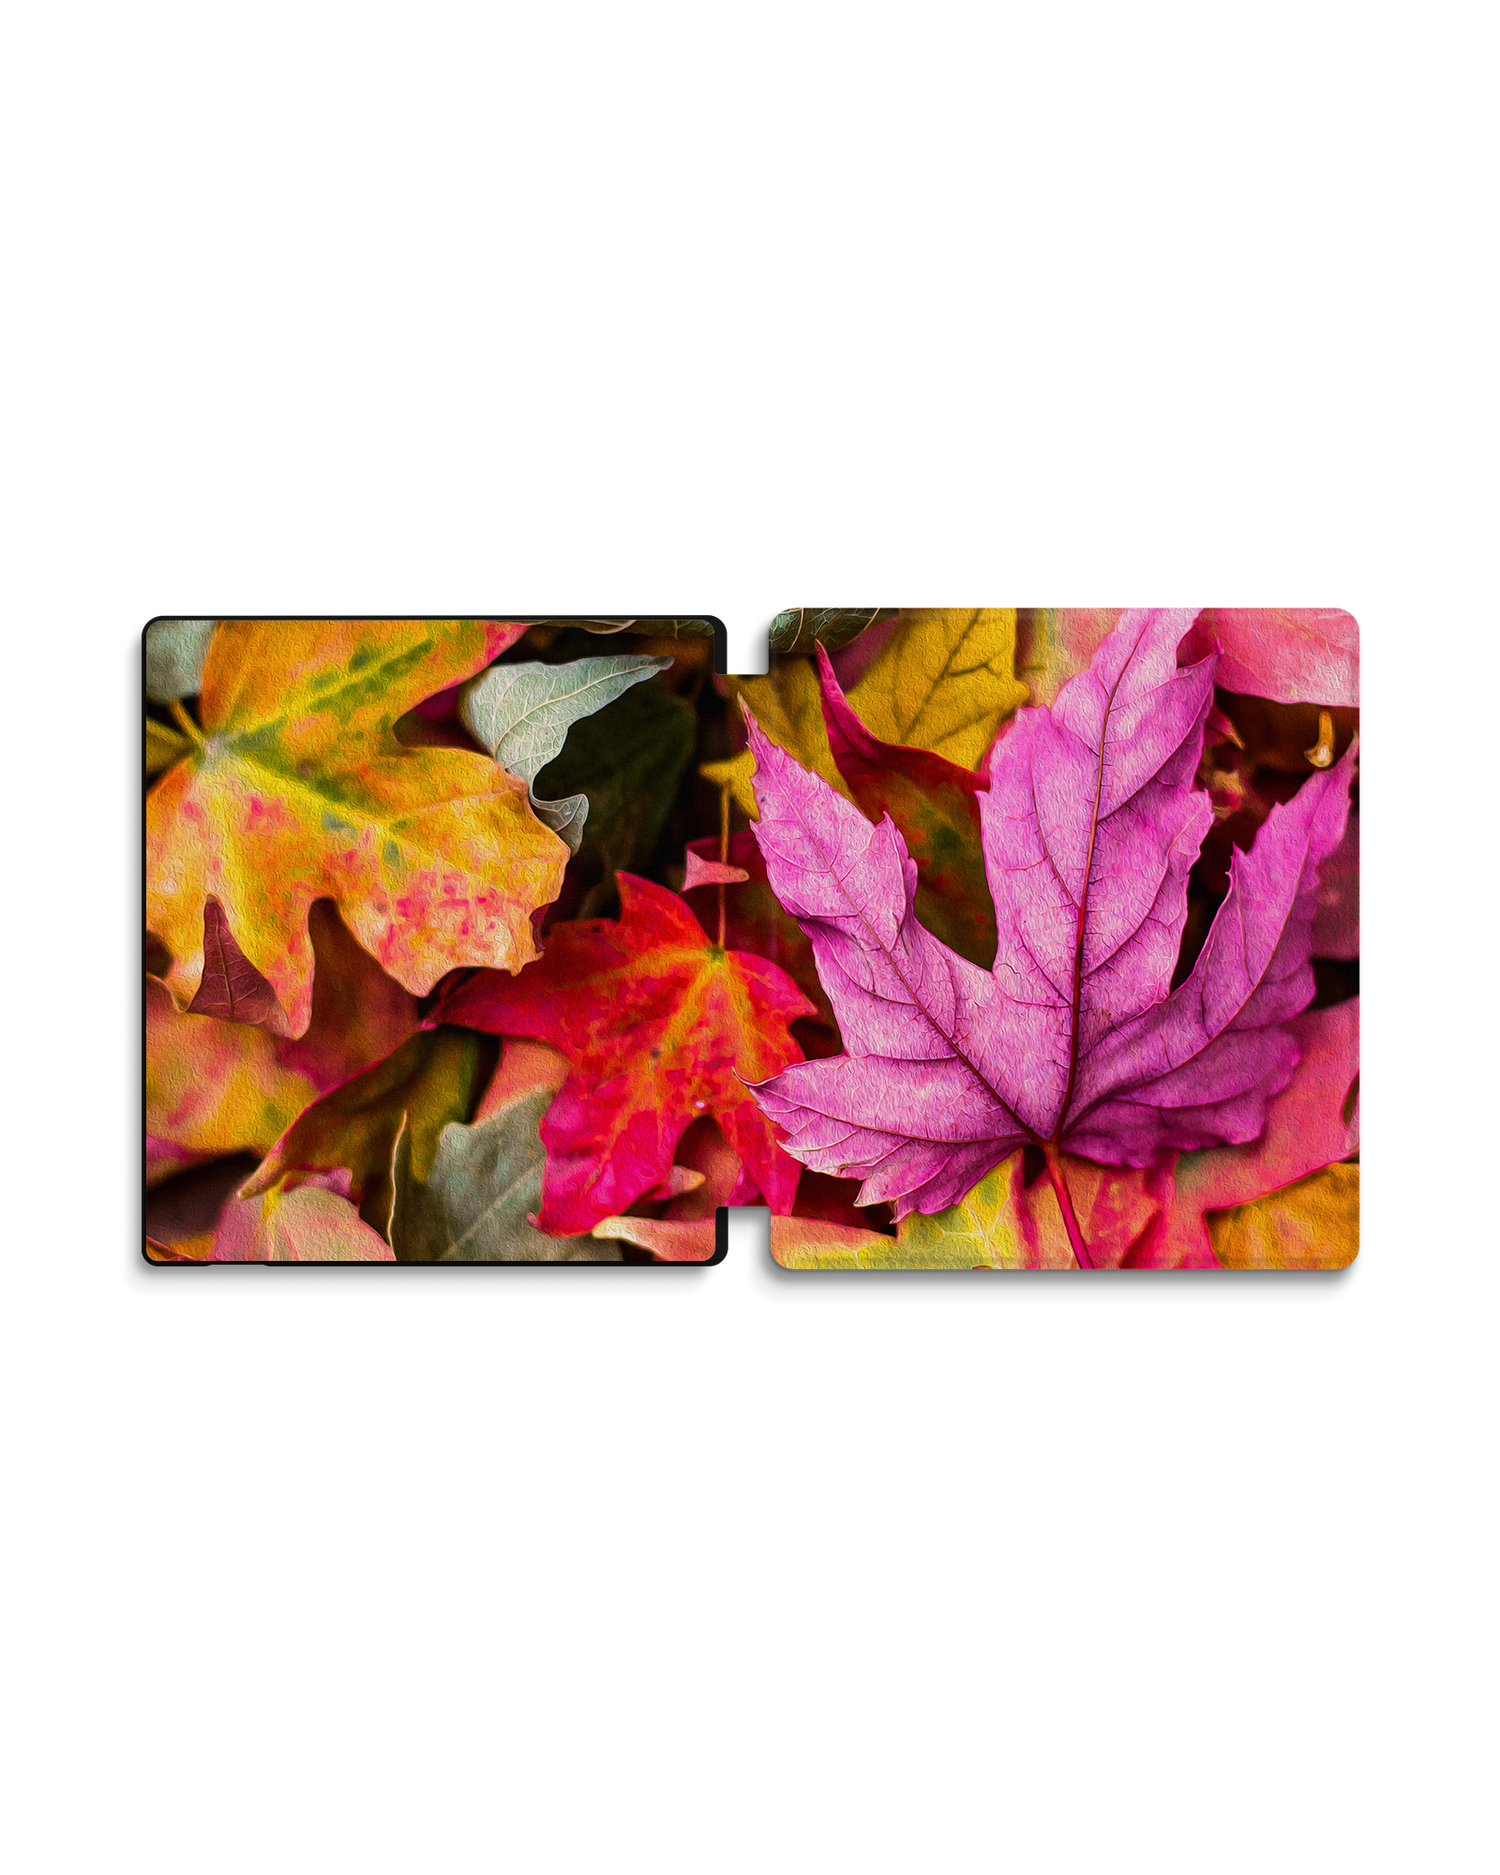 Autumn Leaves eReader Smart Case for Amazon Kindle Oasis: Opened exterior view